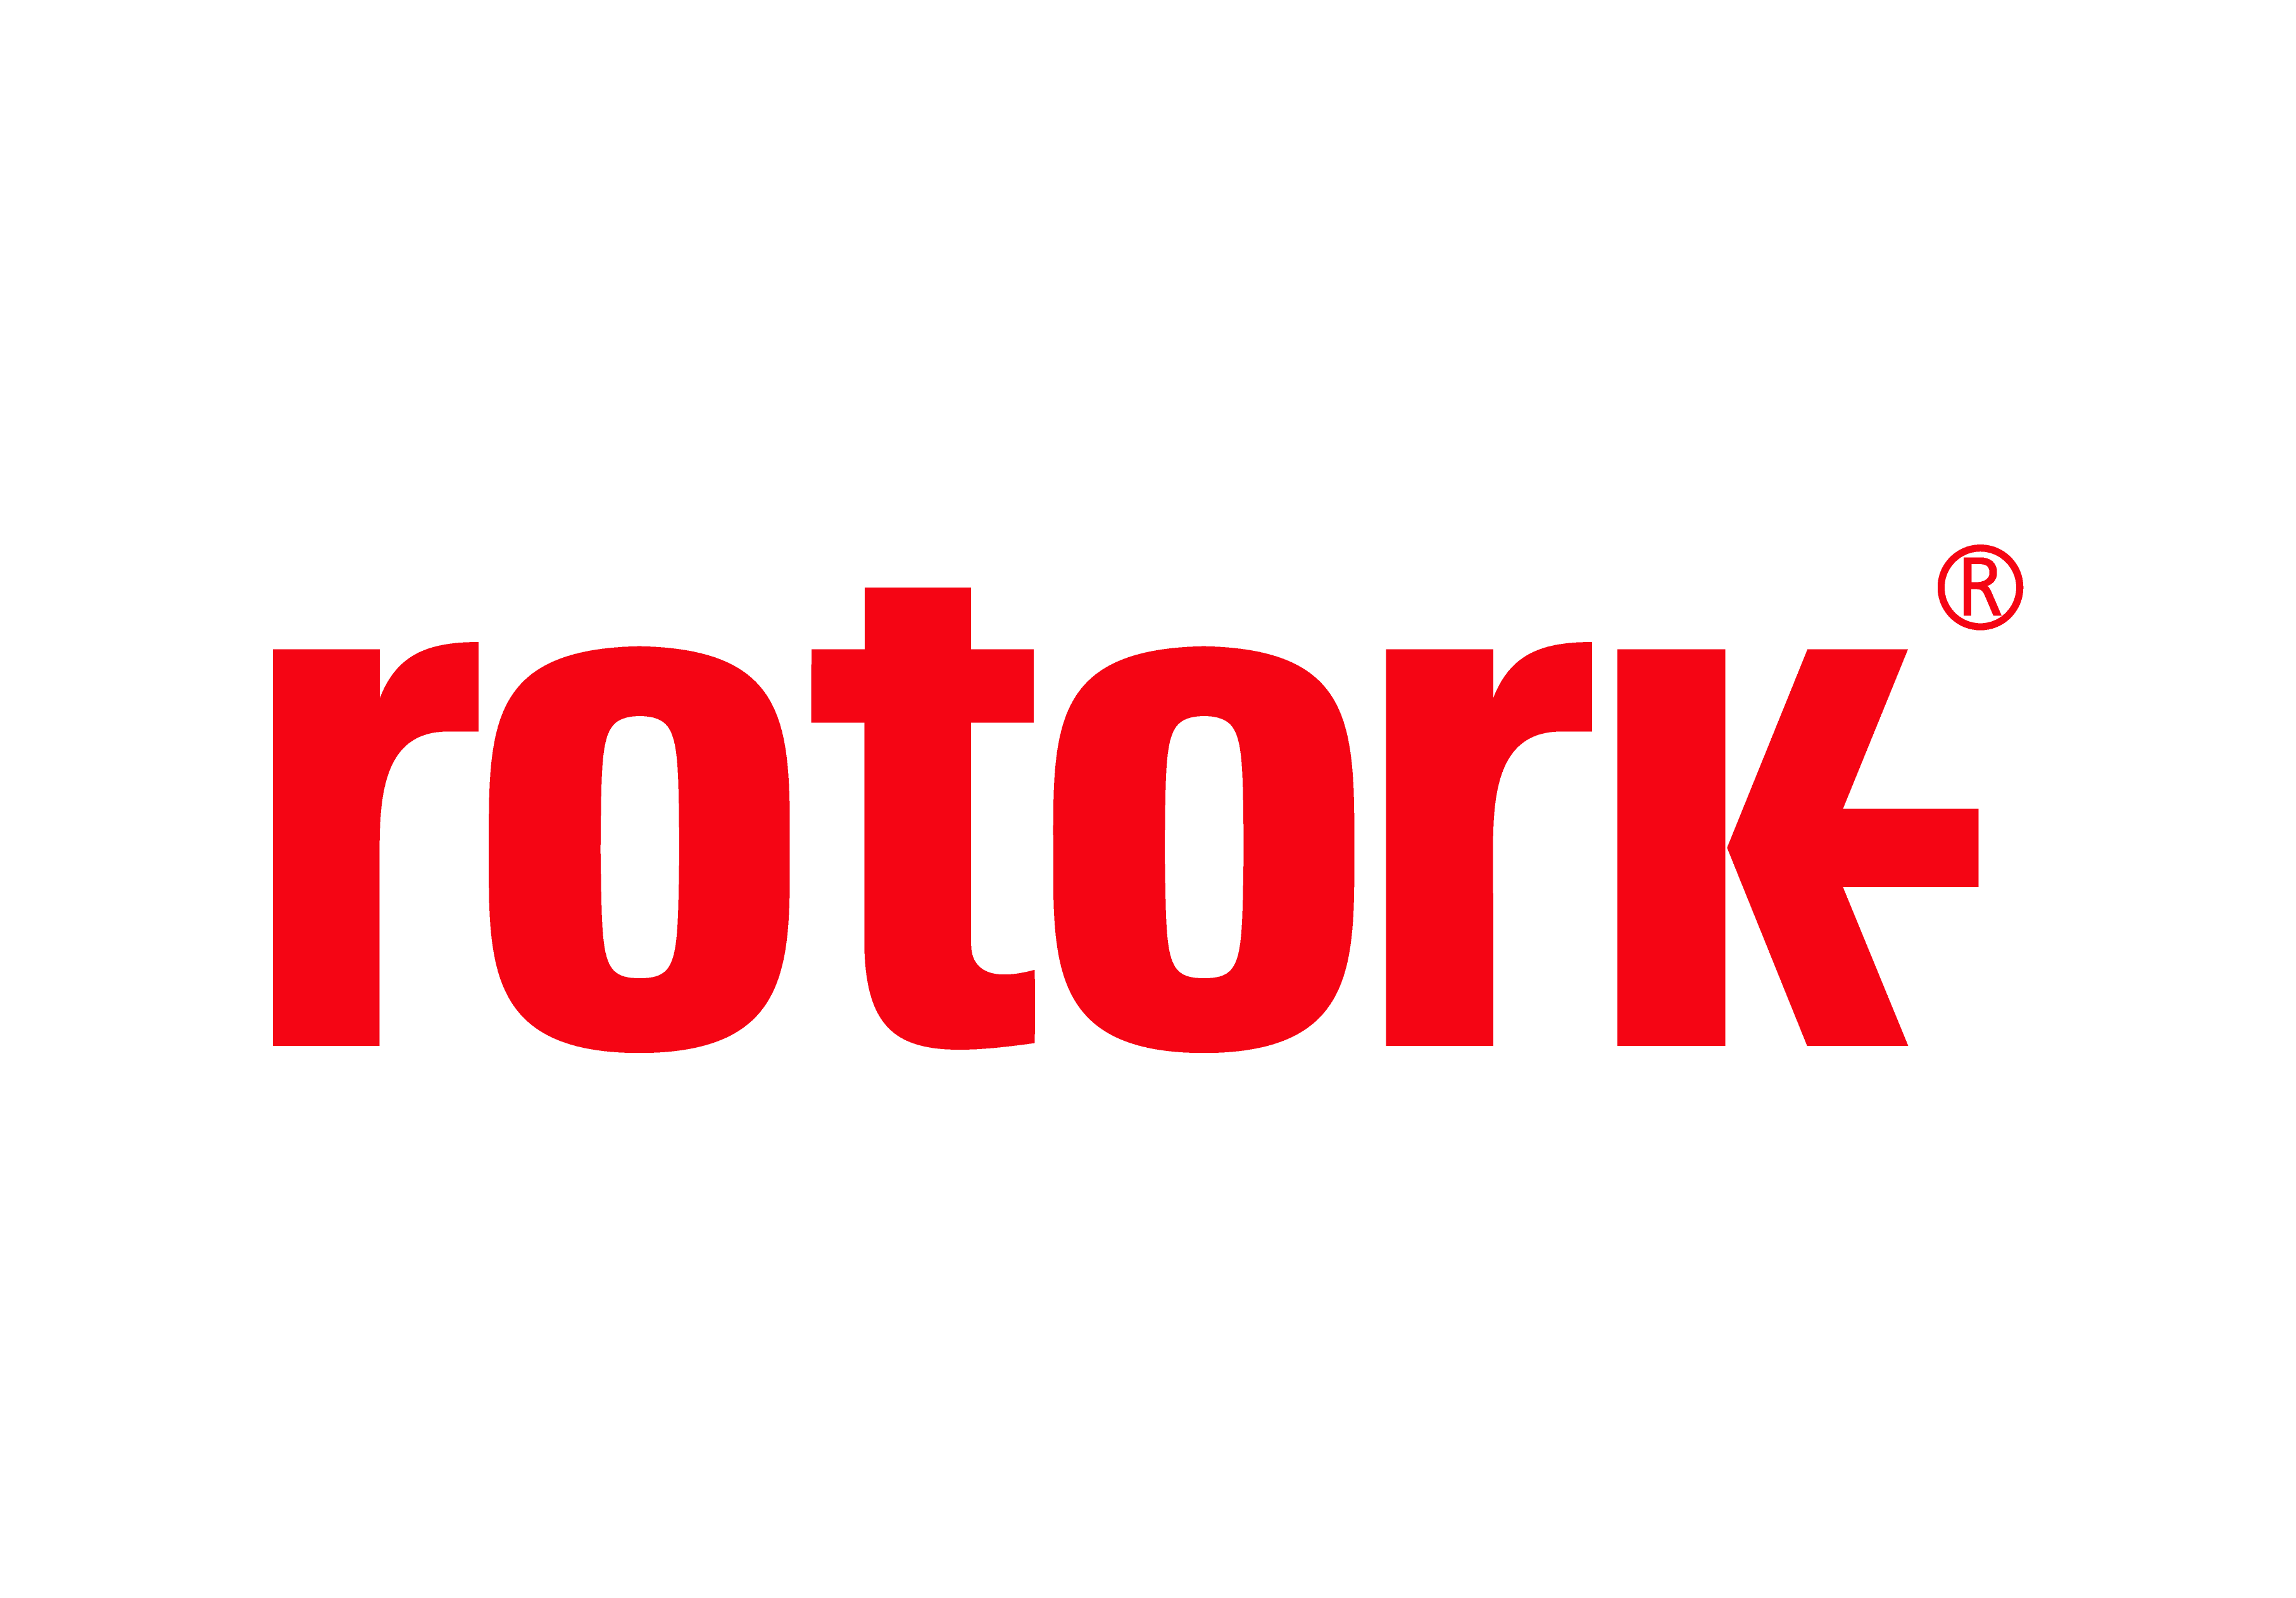 Rotork Supplies Actuators to the Northern Lights Project